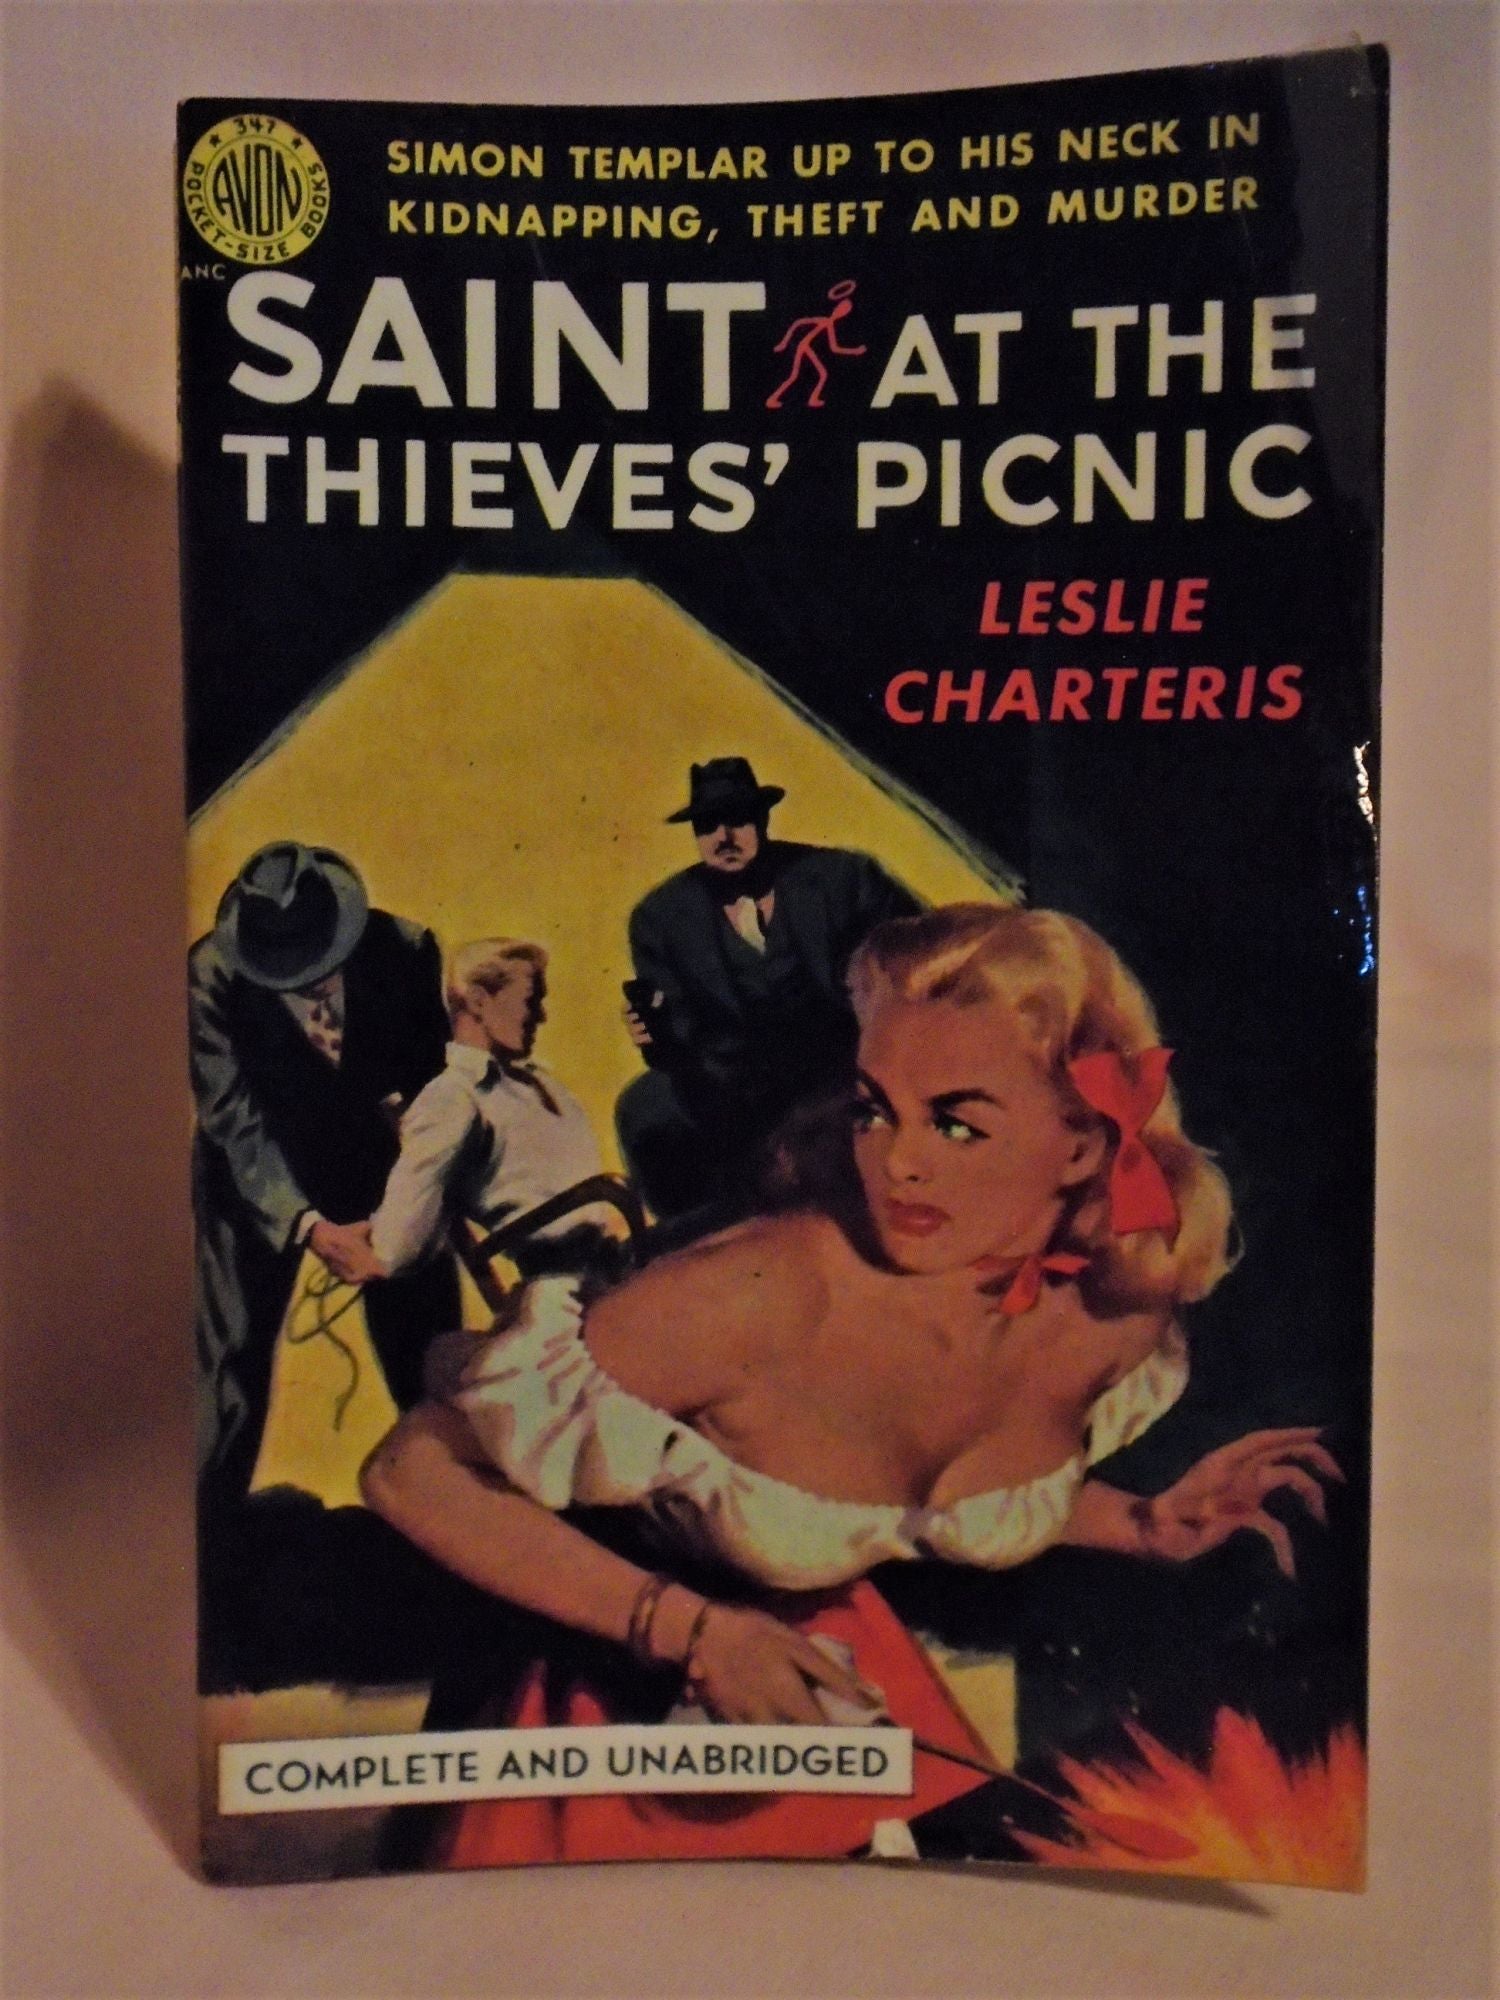 THIEVES'　PICNIC　printing　First　SAINT　THE　Leslie　edition,　THE　AT　paperback　Charteris　first